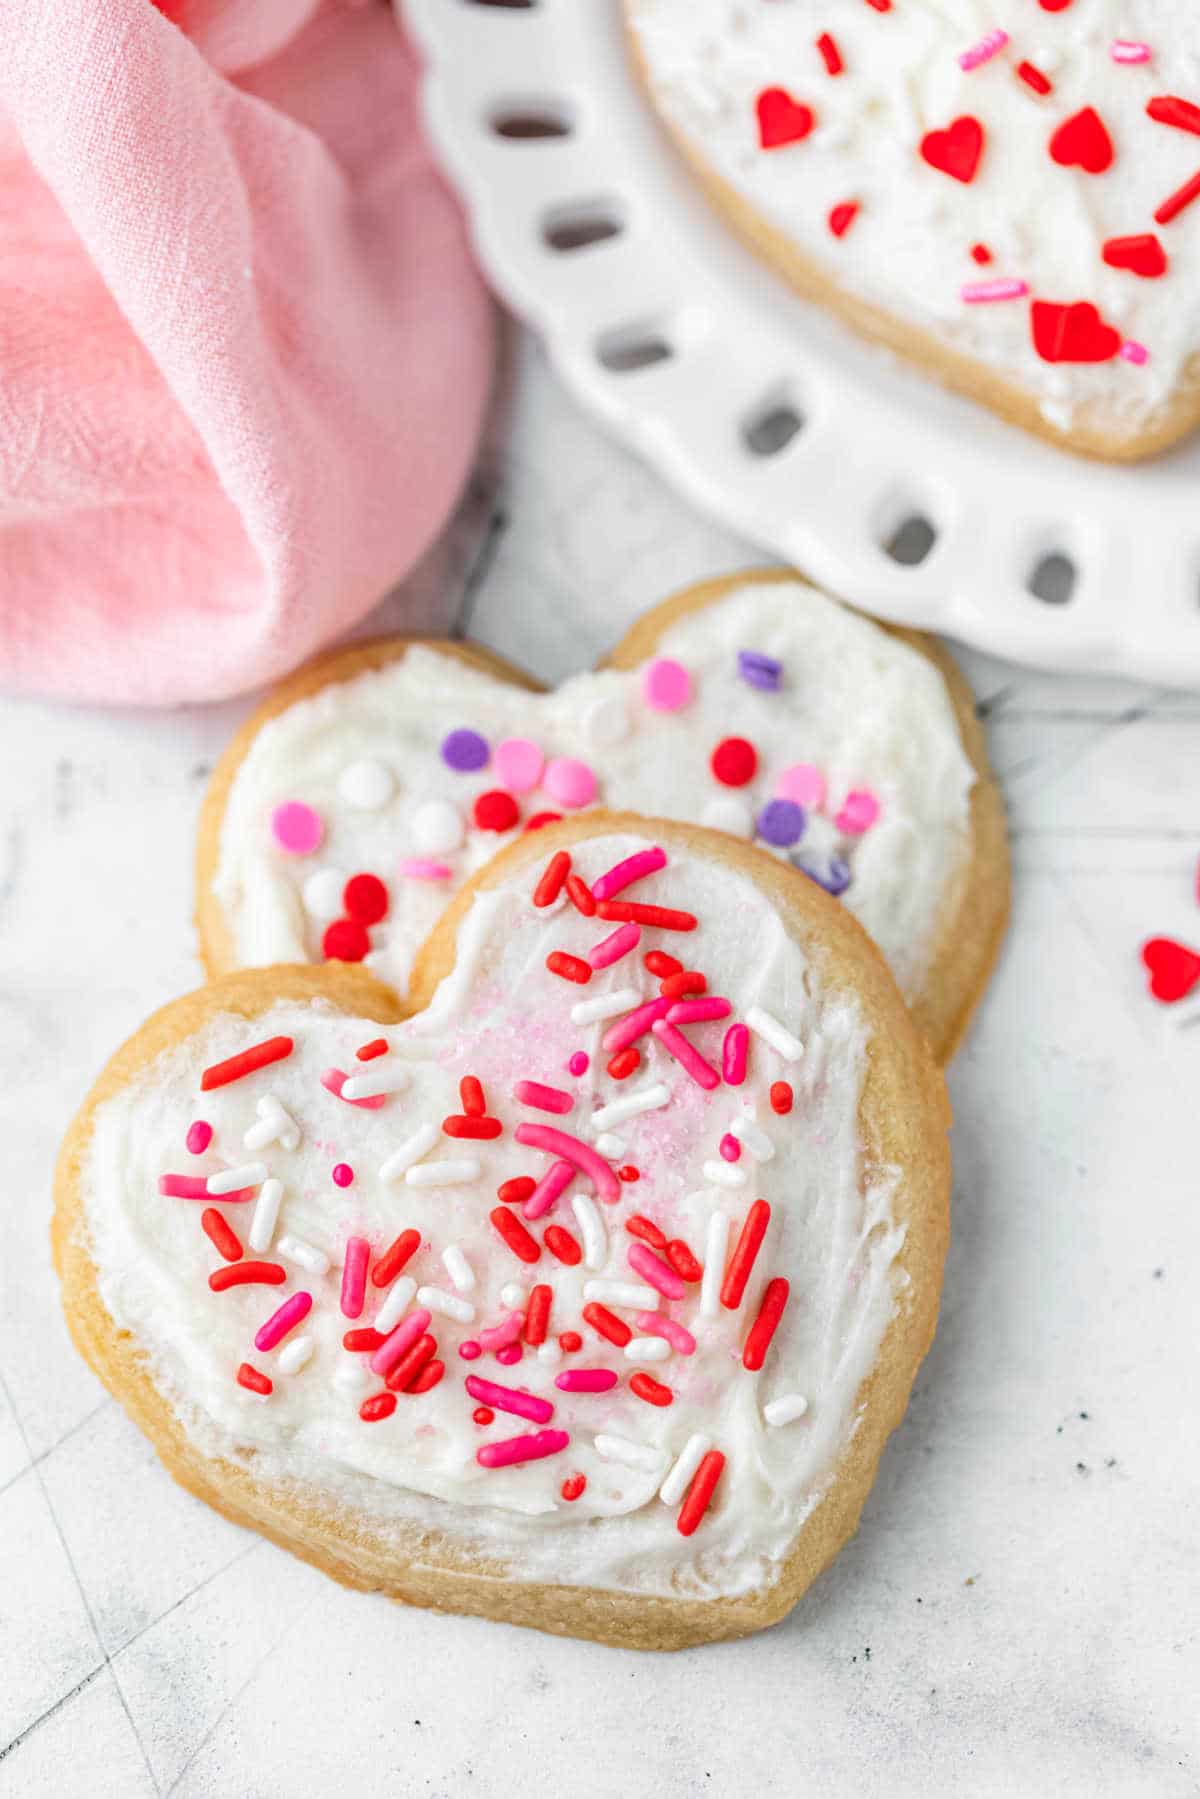 It's time to get inspired and celebrate February 14th with these 20 Valentine's Day dessert recipes including cookies, cupcakes, cakes and more! From red velvet chocolate chip cookies and mini flourless chocolate cakes to easy fresh strawberry mousse, there's something for everyone to love!